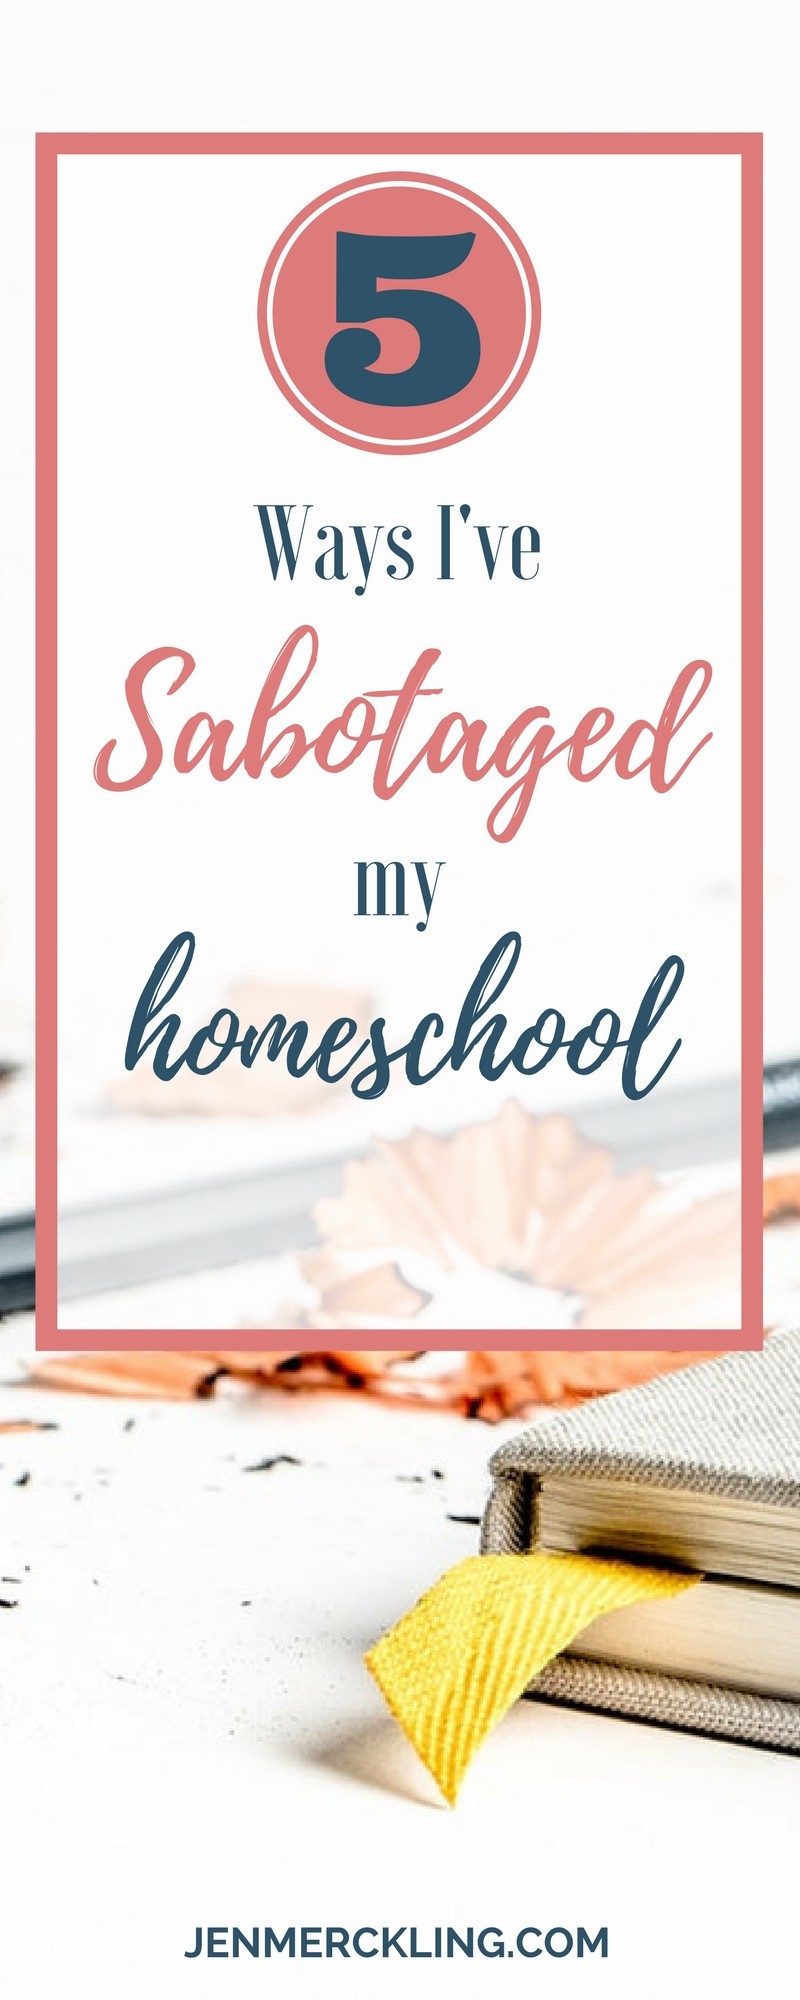 Homeschooling can be hard! But sometimes I've made it harder than it needed to be--sharing some lessons I've learned after 14 years!